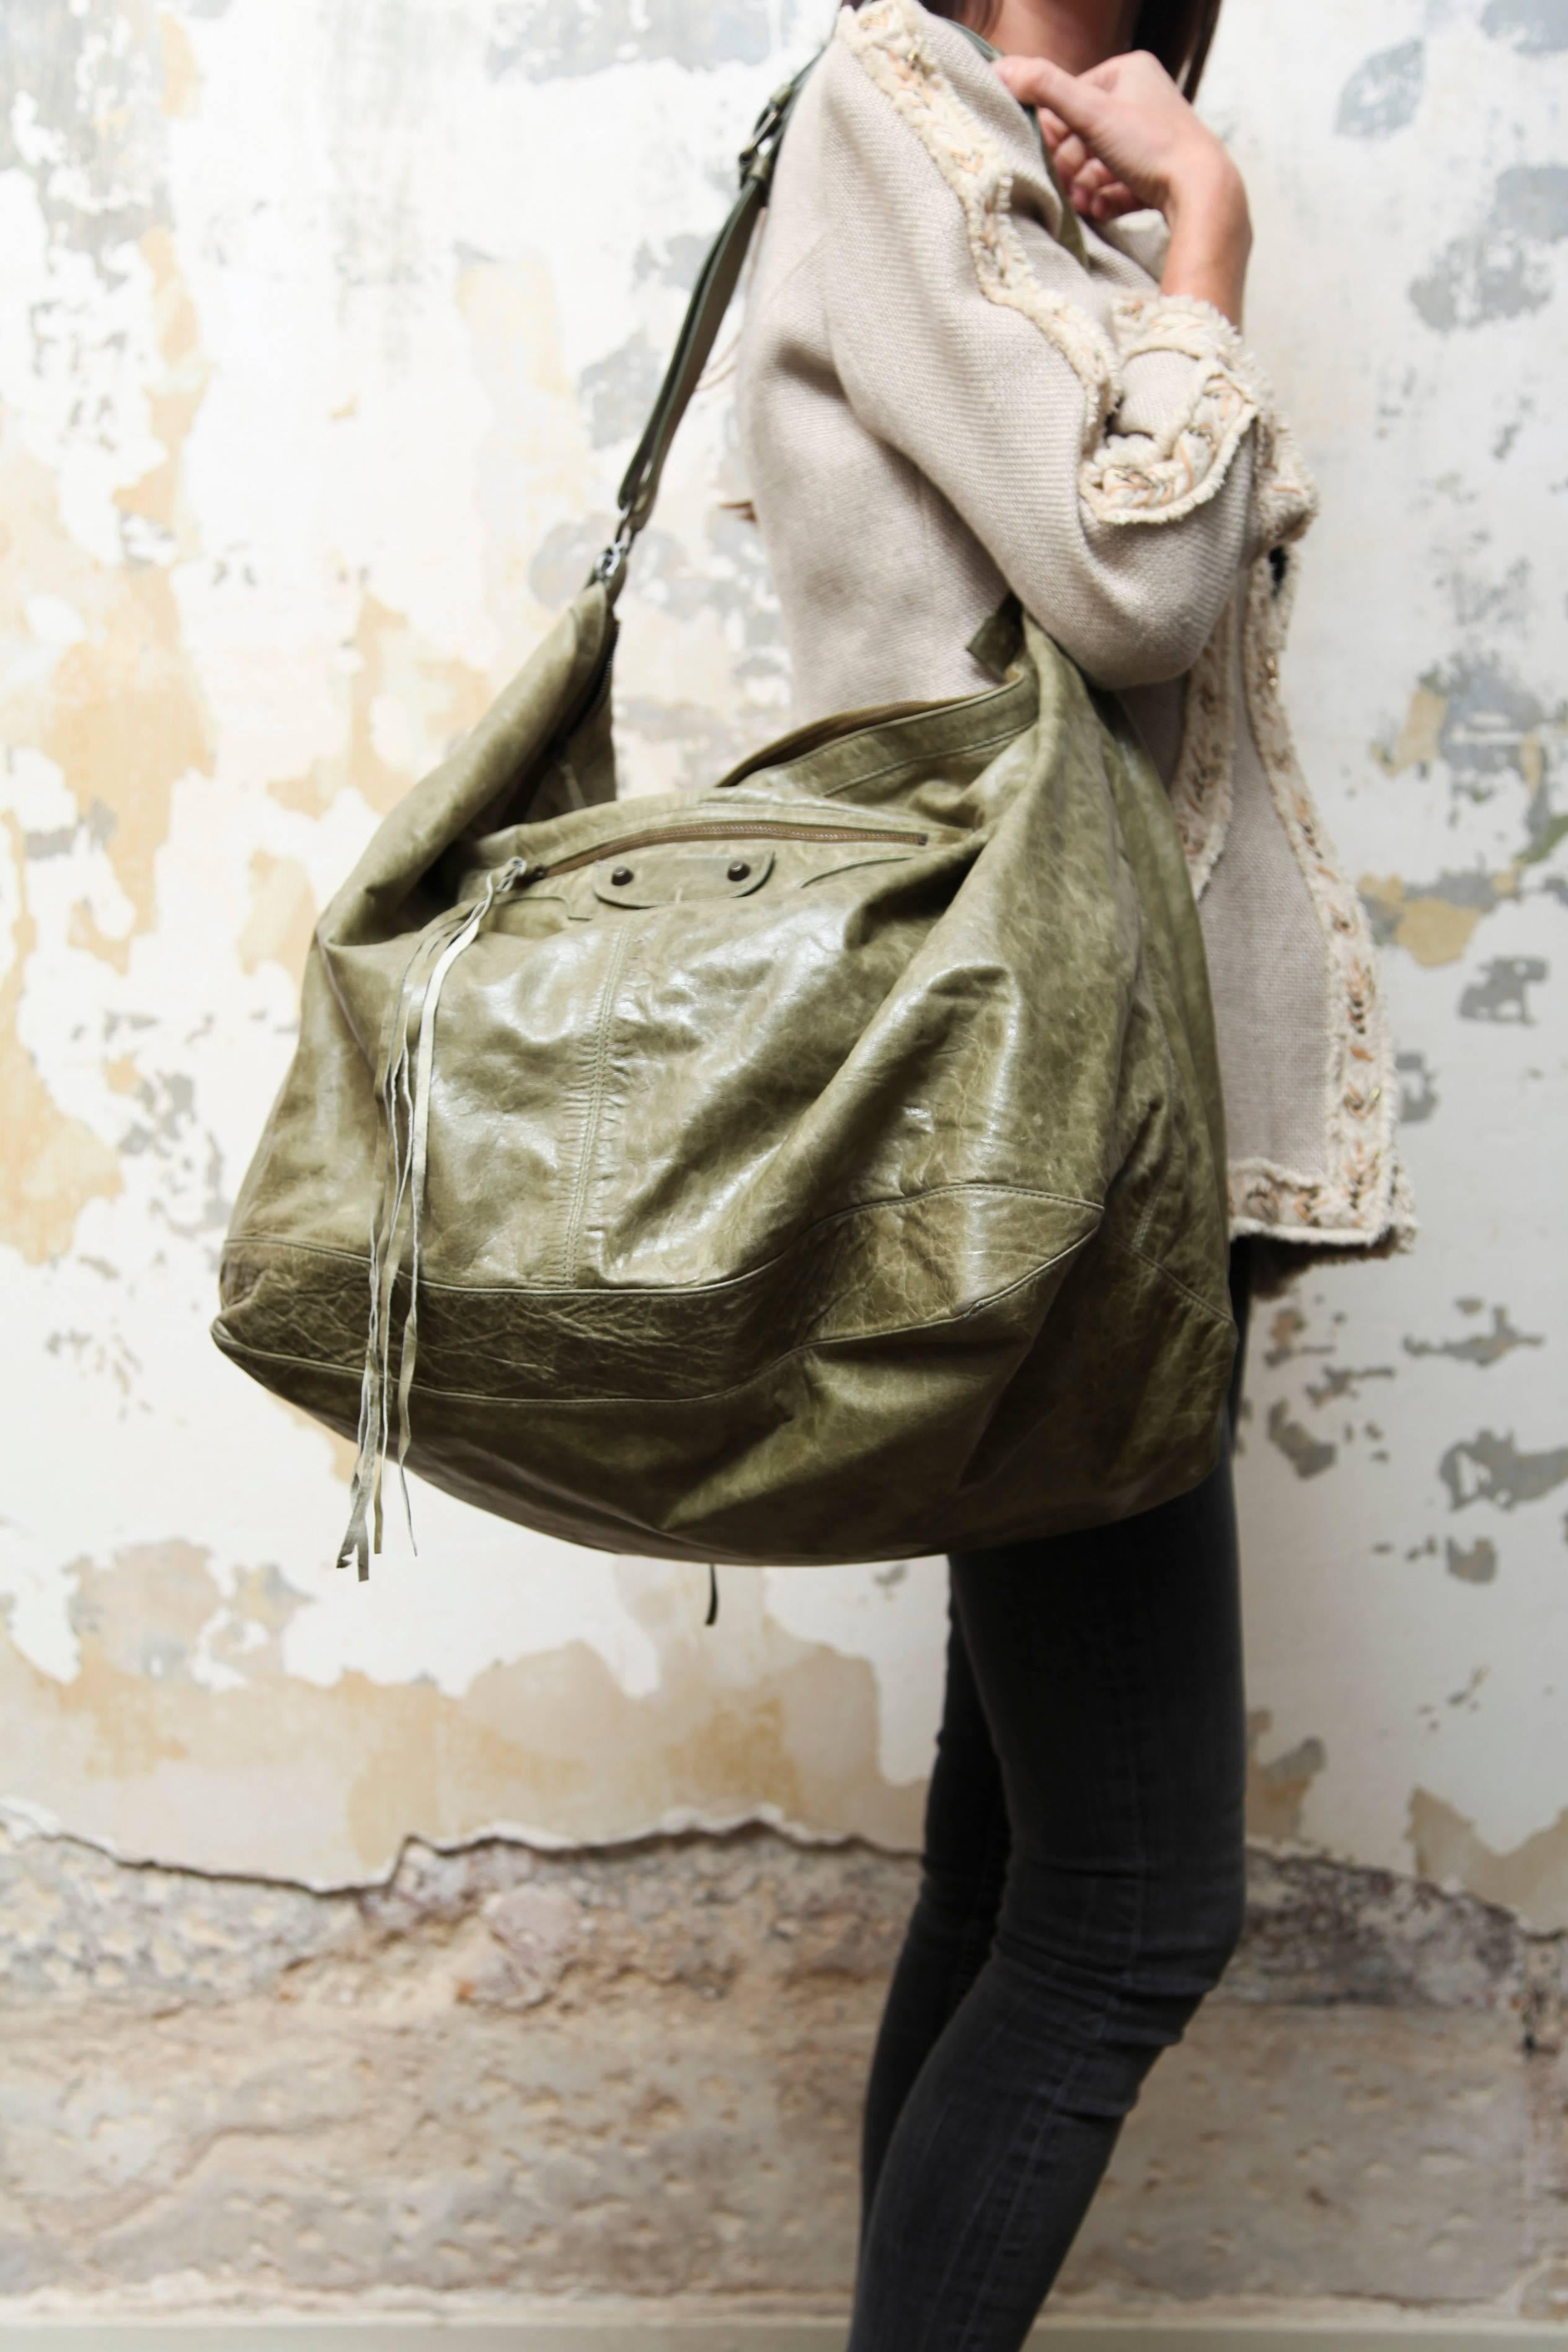 Balenciaga weekender bag in green aged leather. Aged gold hardware. Zip closure. The interior is in black cloth.

Serial number: 159686 ... Made in Italy. In very good condition.

Dimensions : Length: 66 cm, height: 37 cm, depth: 24.5 cm, shoulder